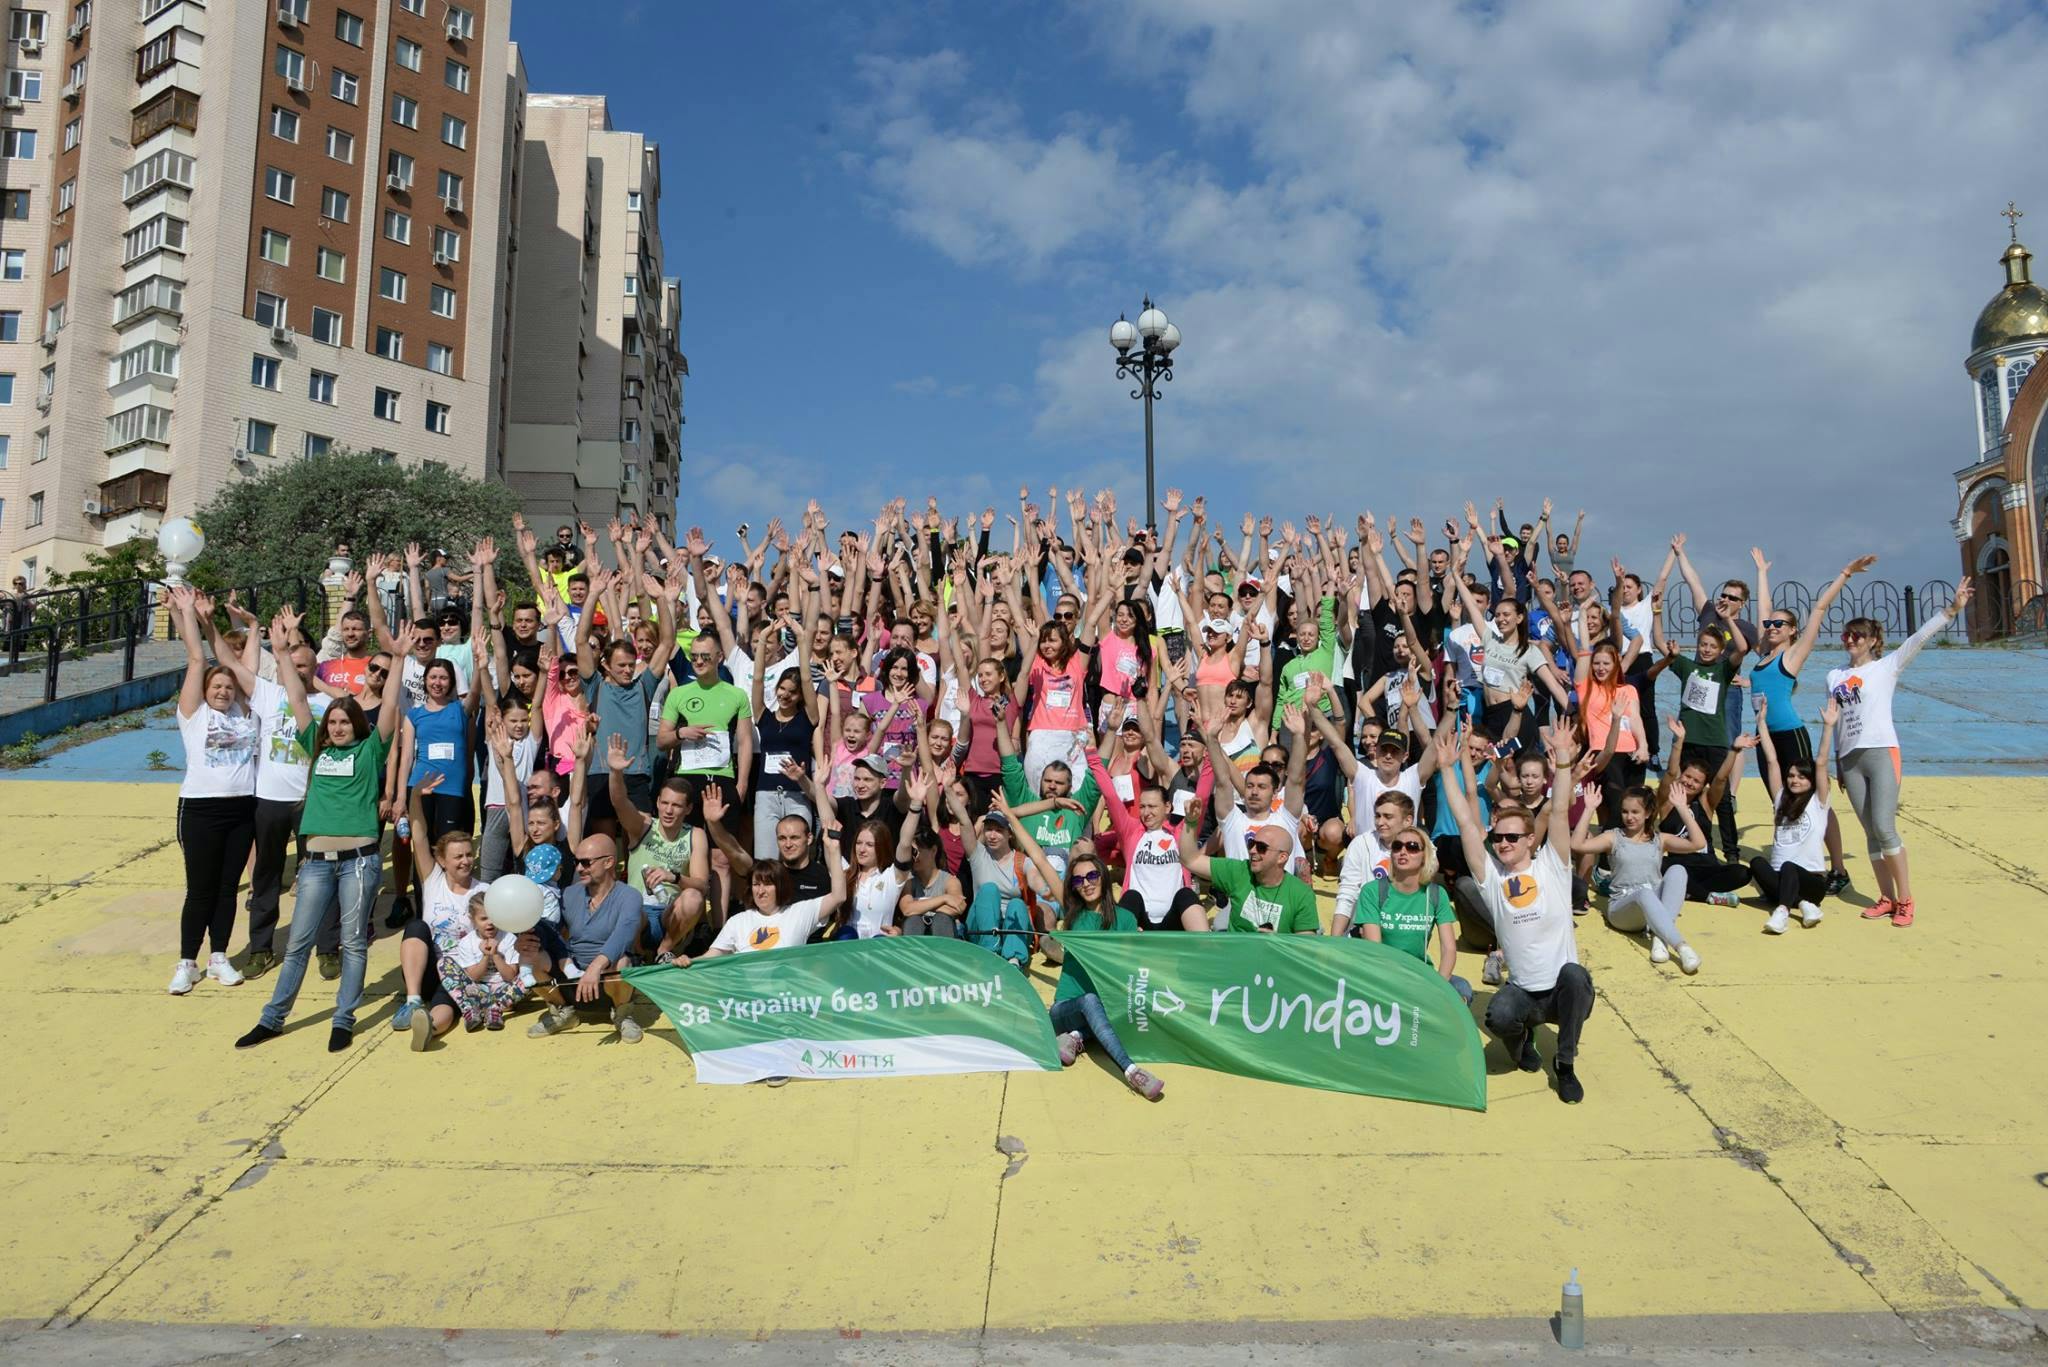 In the picture - participants of the Runday race in Kyiv